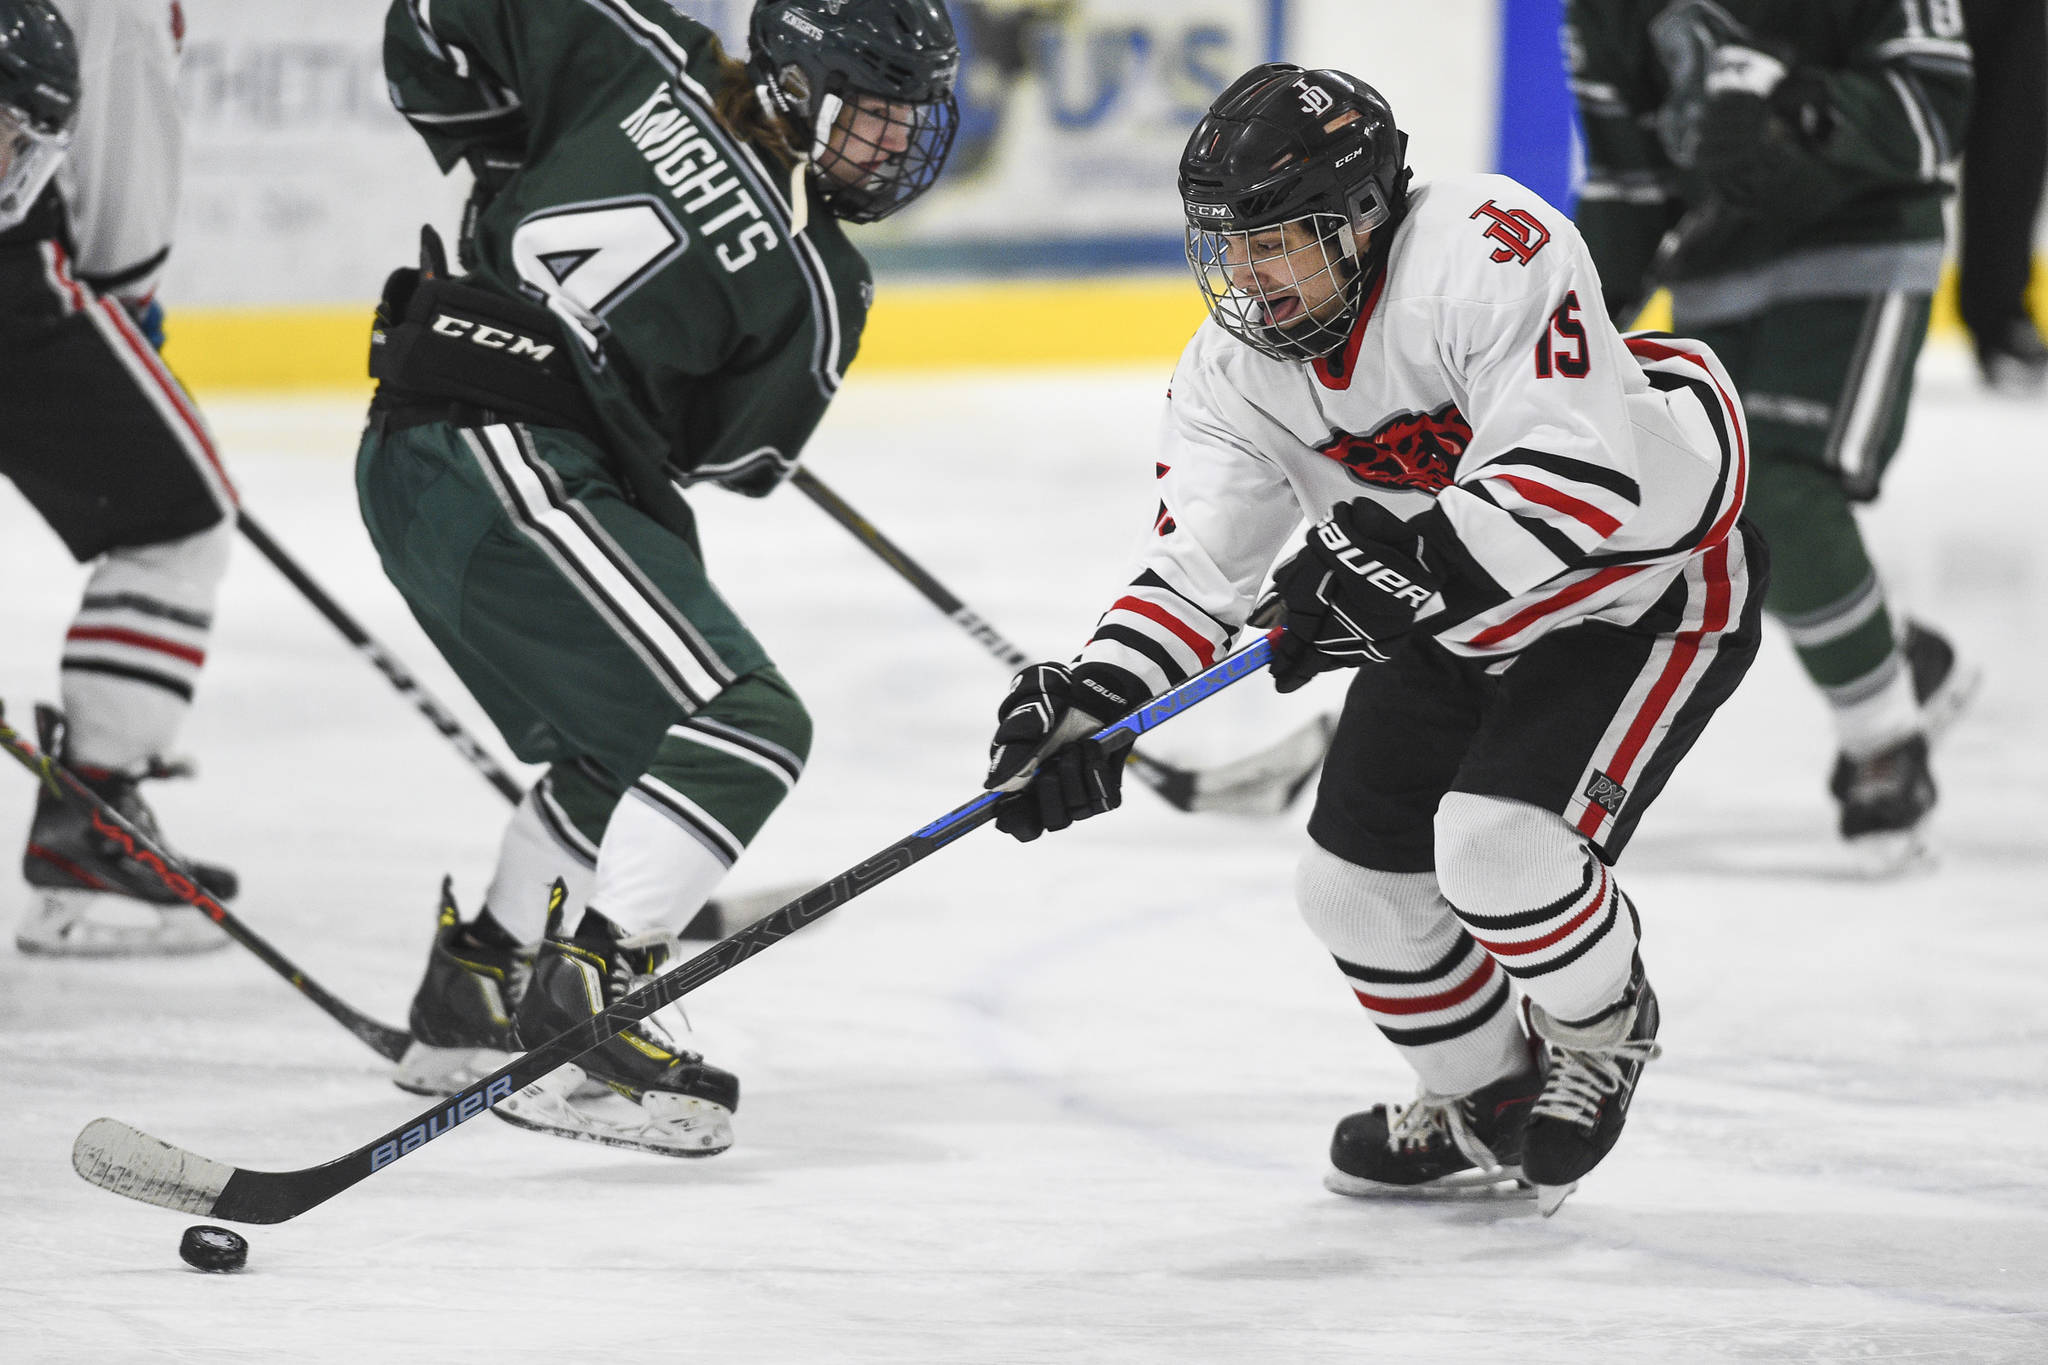 Juneau-Douglas’ Josh Frisby, right, moves the puck by Colony’s Benjamin Loggins at Treadwell Arena on Friday, Nov. 22, 2019. (Michael Penn | Juneau Empire)